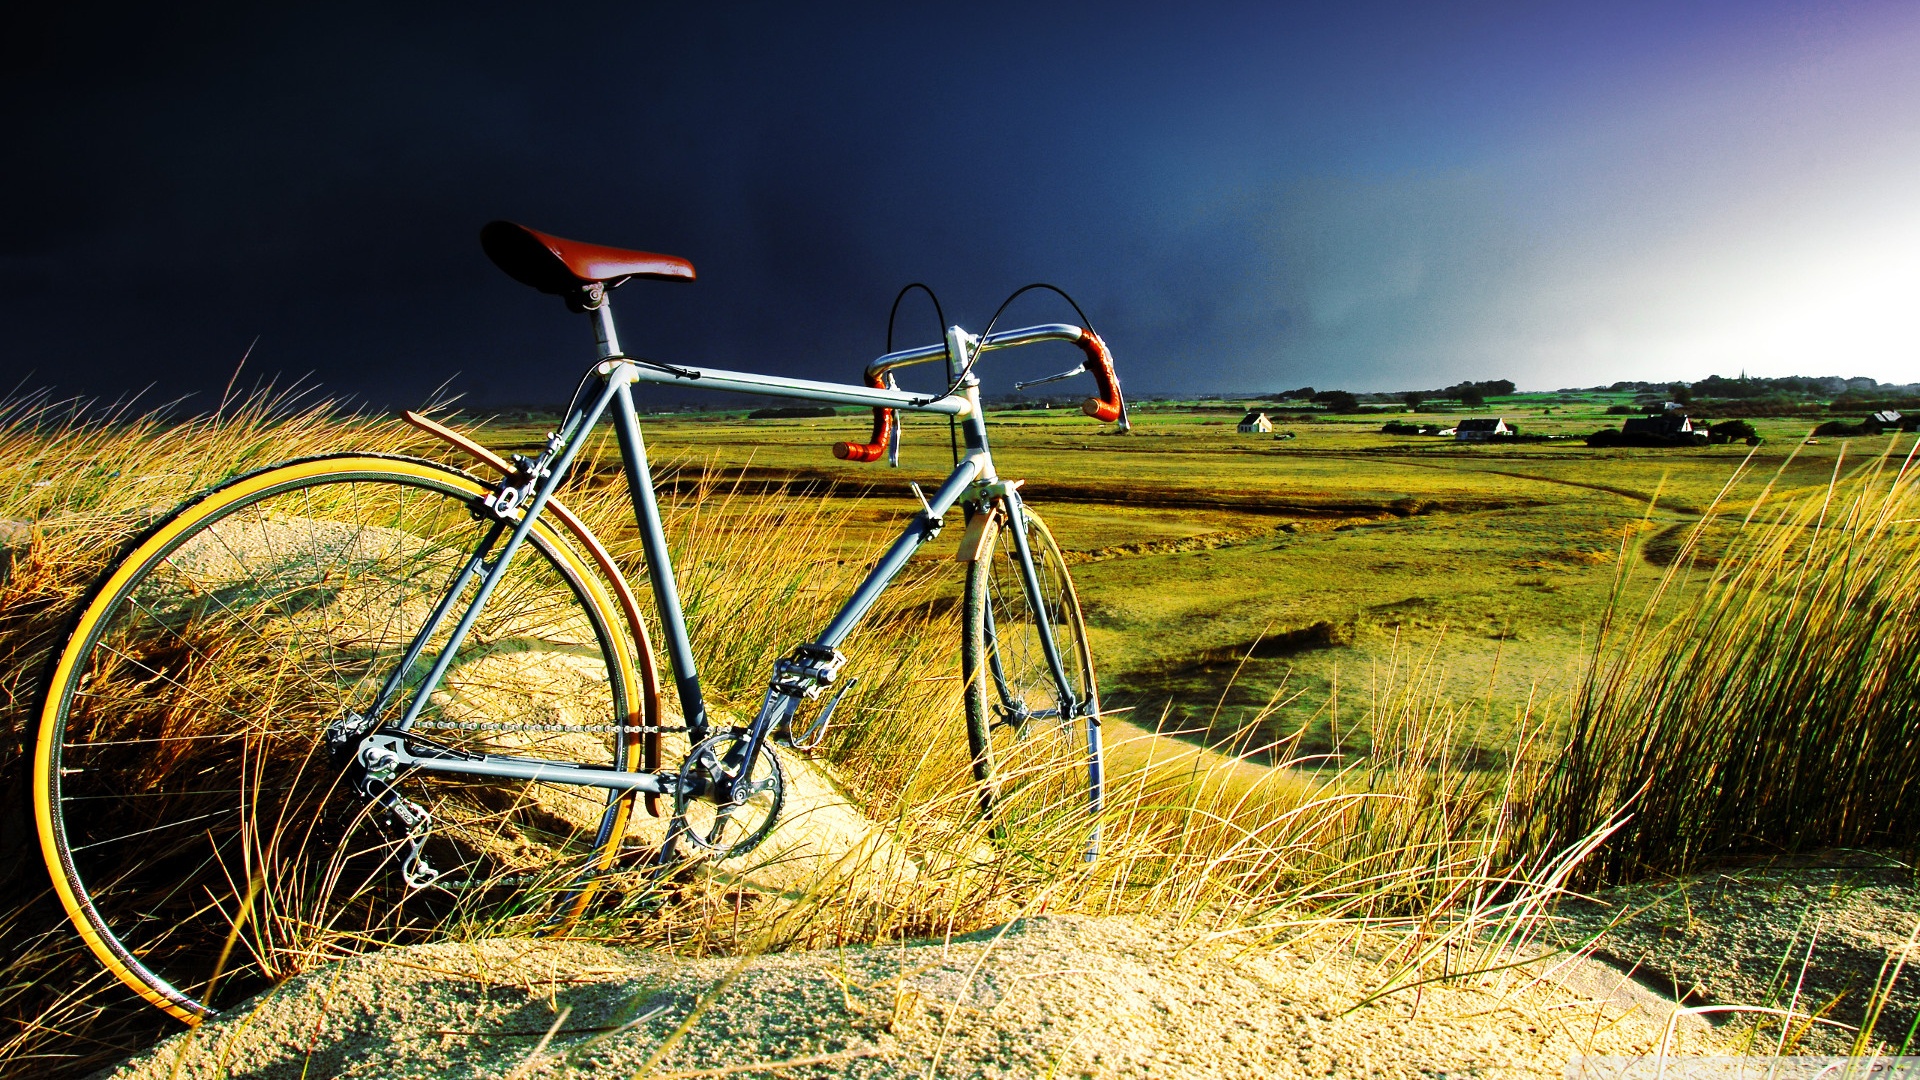 Vintage Bicycle In The Storm Wallpaper